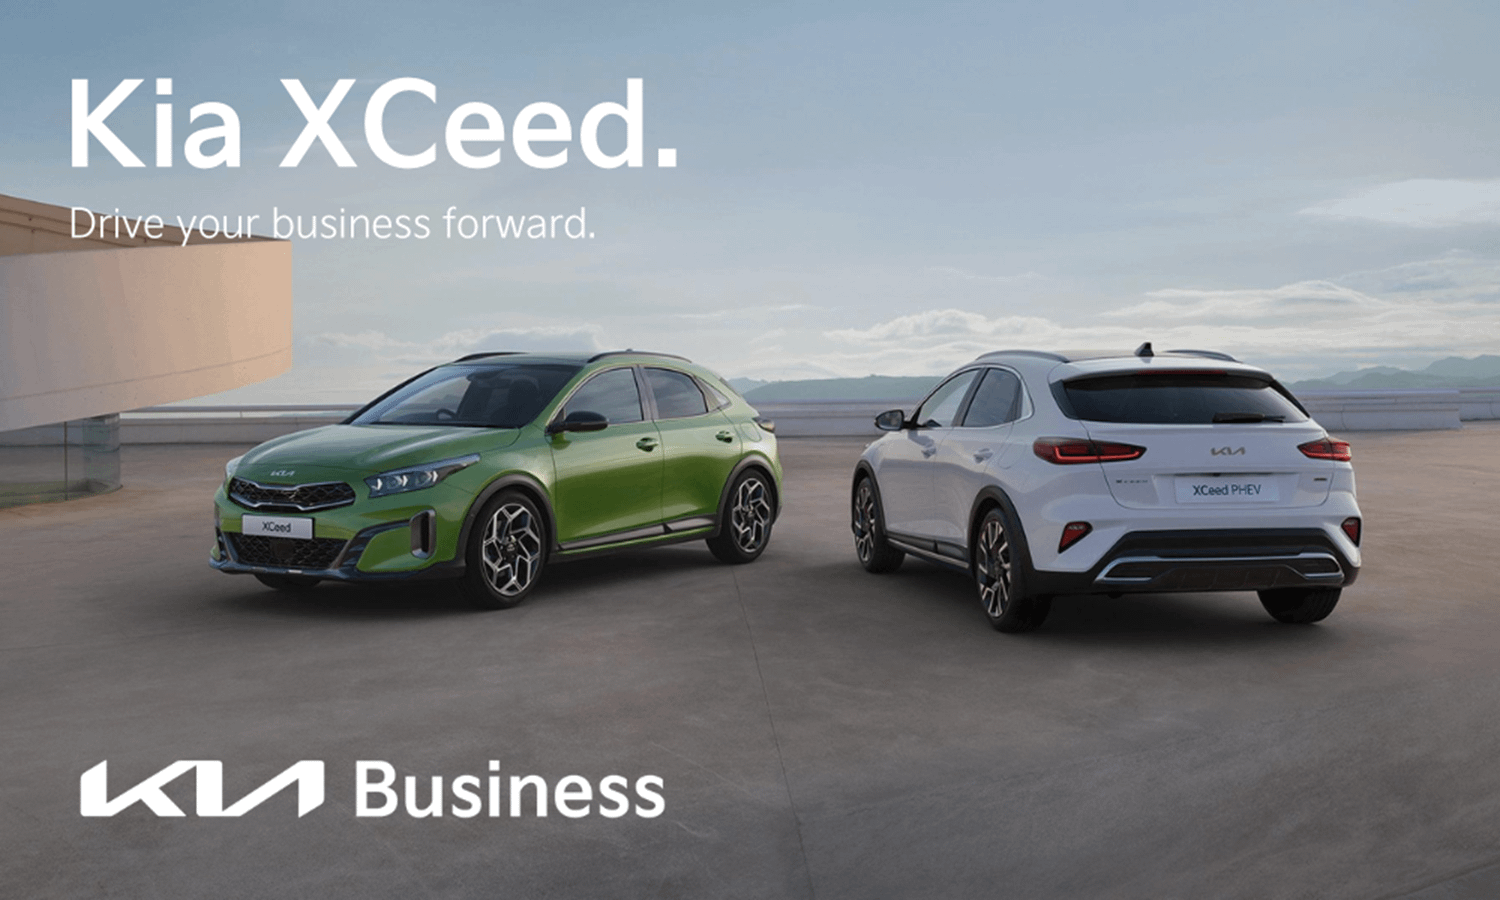 Kia XCeed in green and white for business users